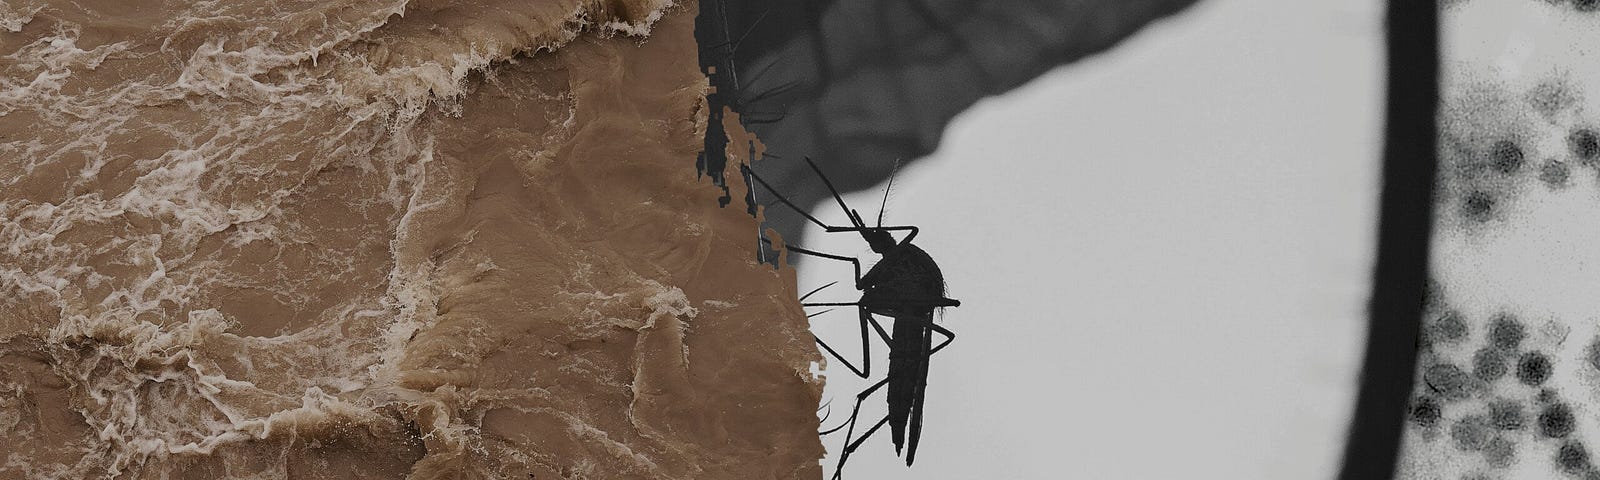 A combination of two images, a mosquito and a flood, to demonstrate the relationship between climate change and infectious diseases.